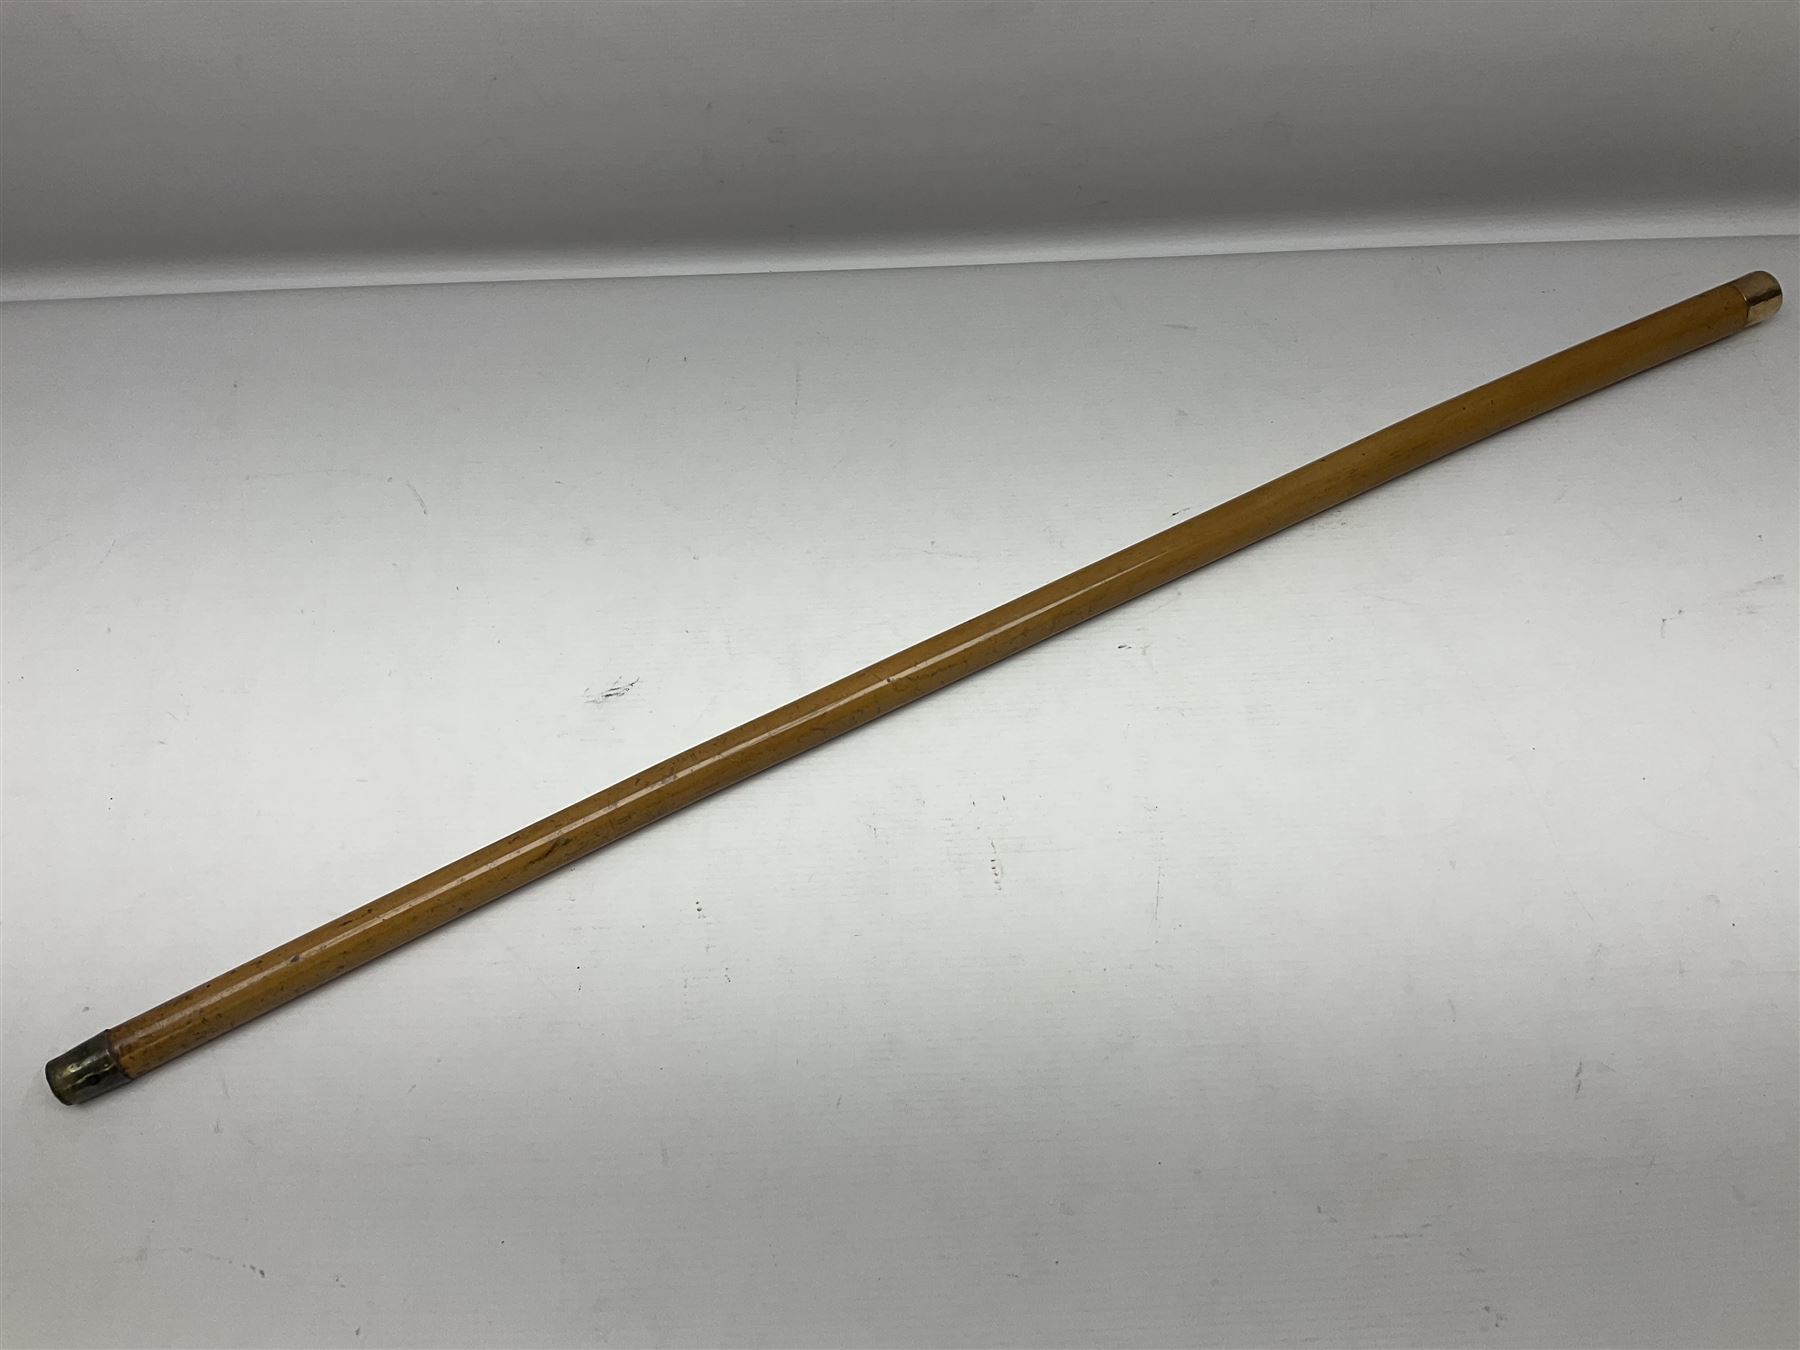 Malacca walking cane mounted with gold cap - Image 11 of 11